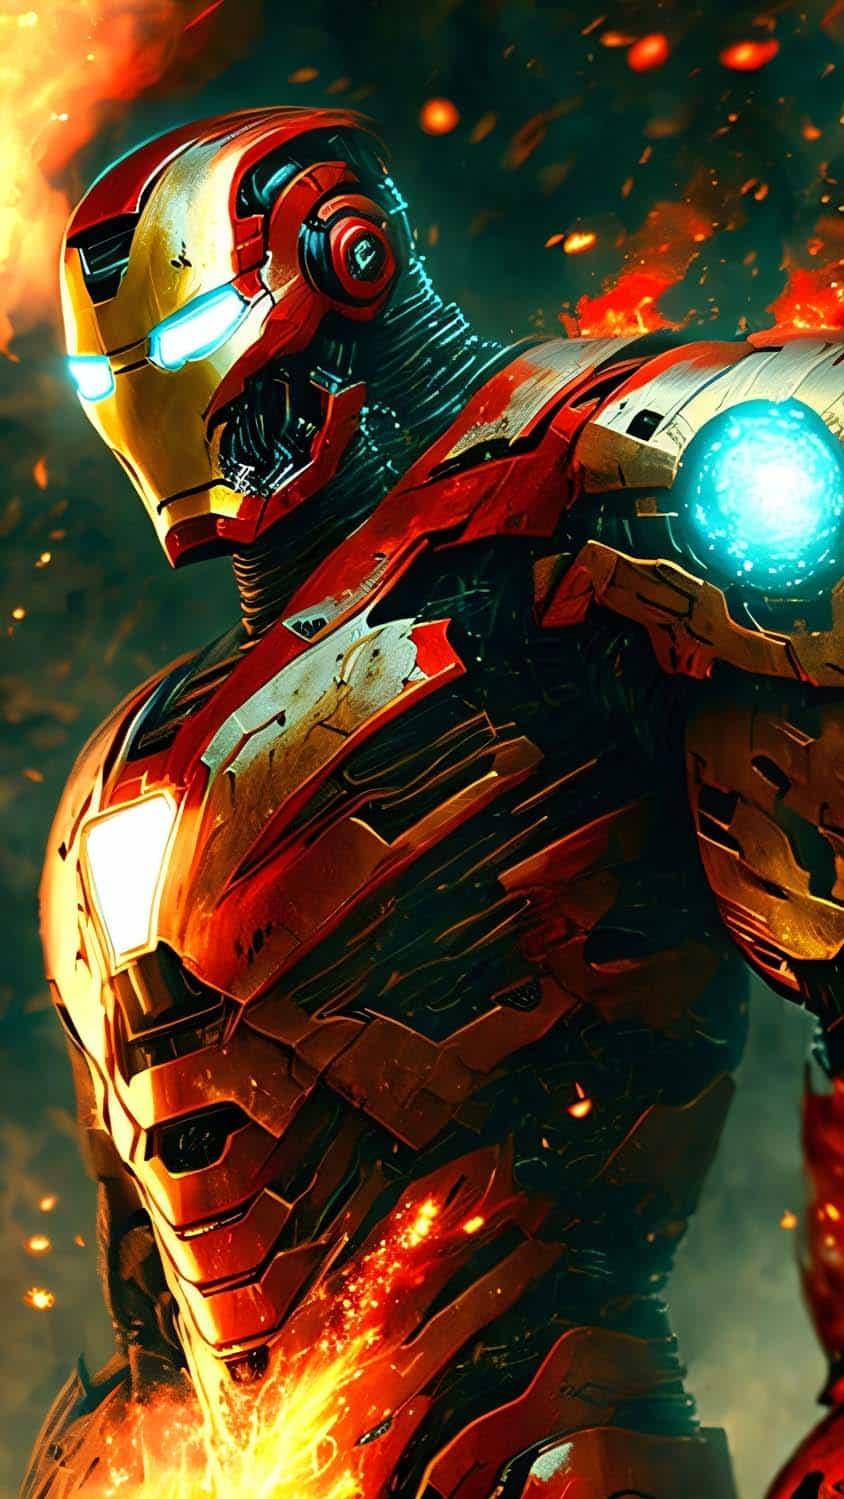 The Iron Man Armor IPhone Wallpaper HD   IPhone Wallpapers